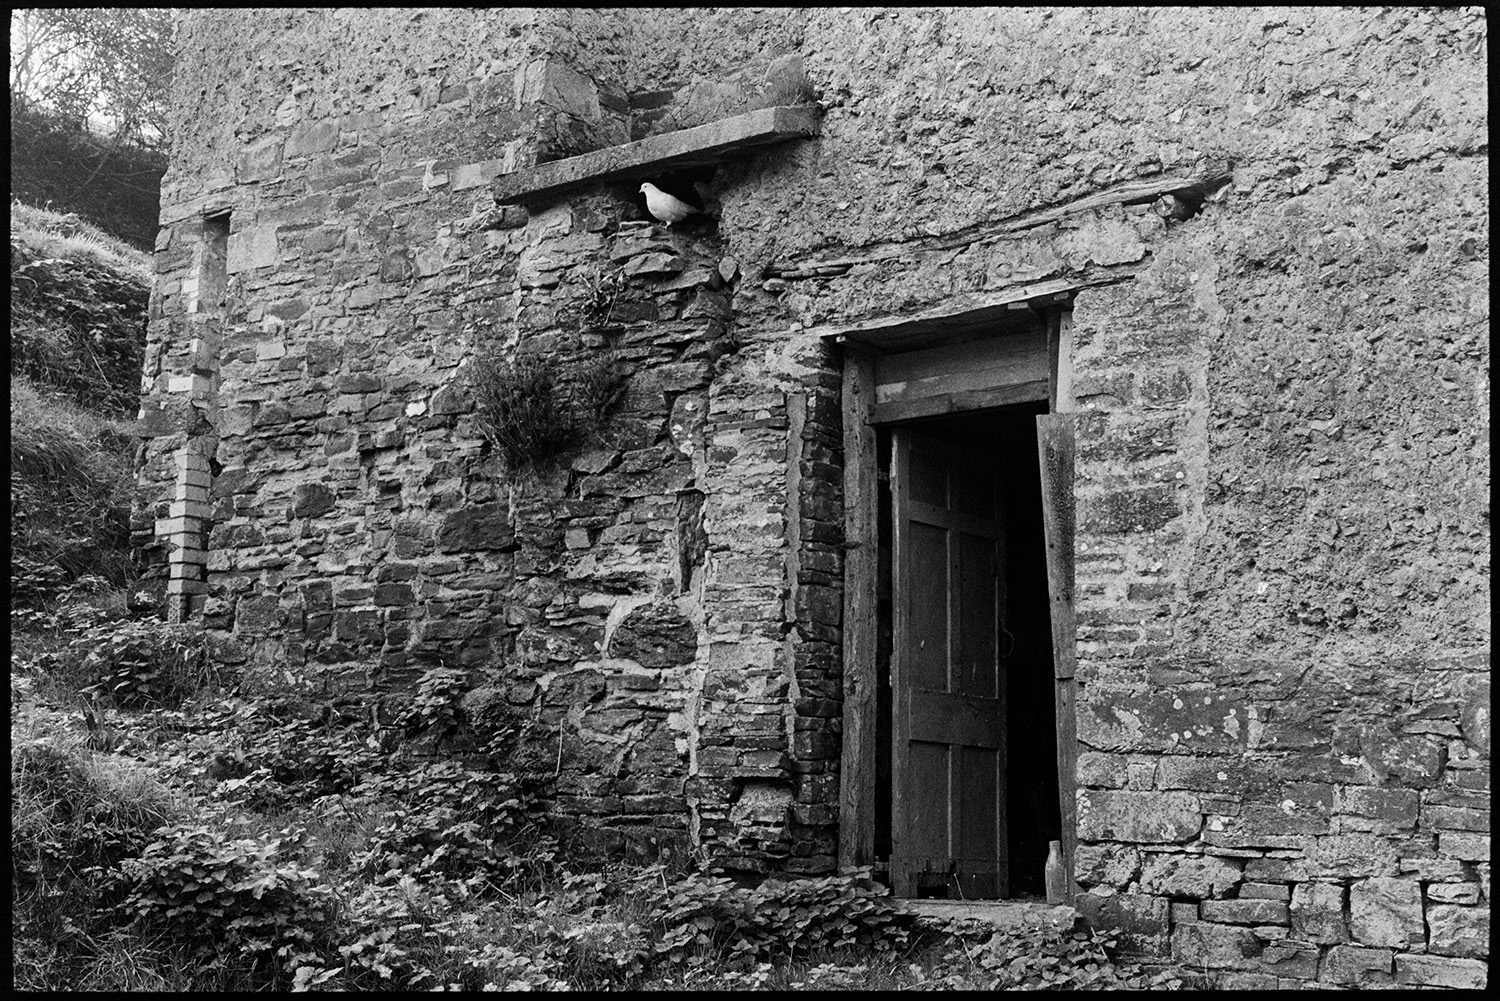 Door of old cob cottage with pair of doves, pigeons, stone and cob construction, renovated now. 
[A dove perched on a ledge above the door of a cob and stone building at Millhams, Dolton.]